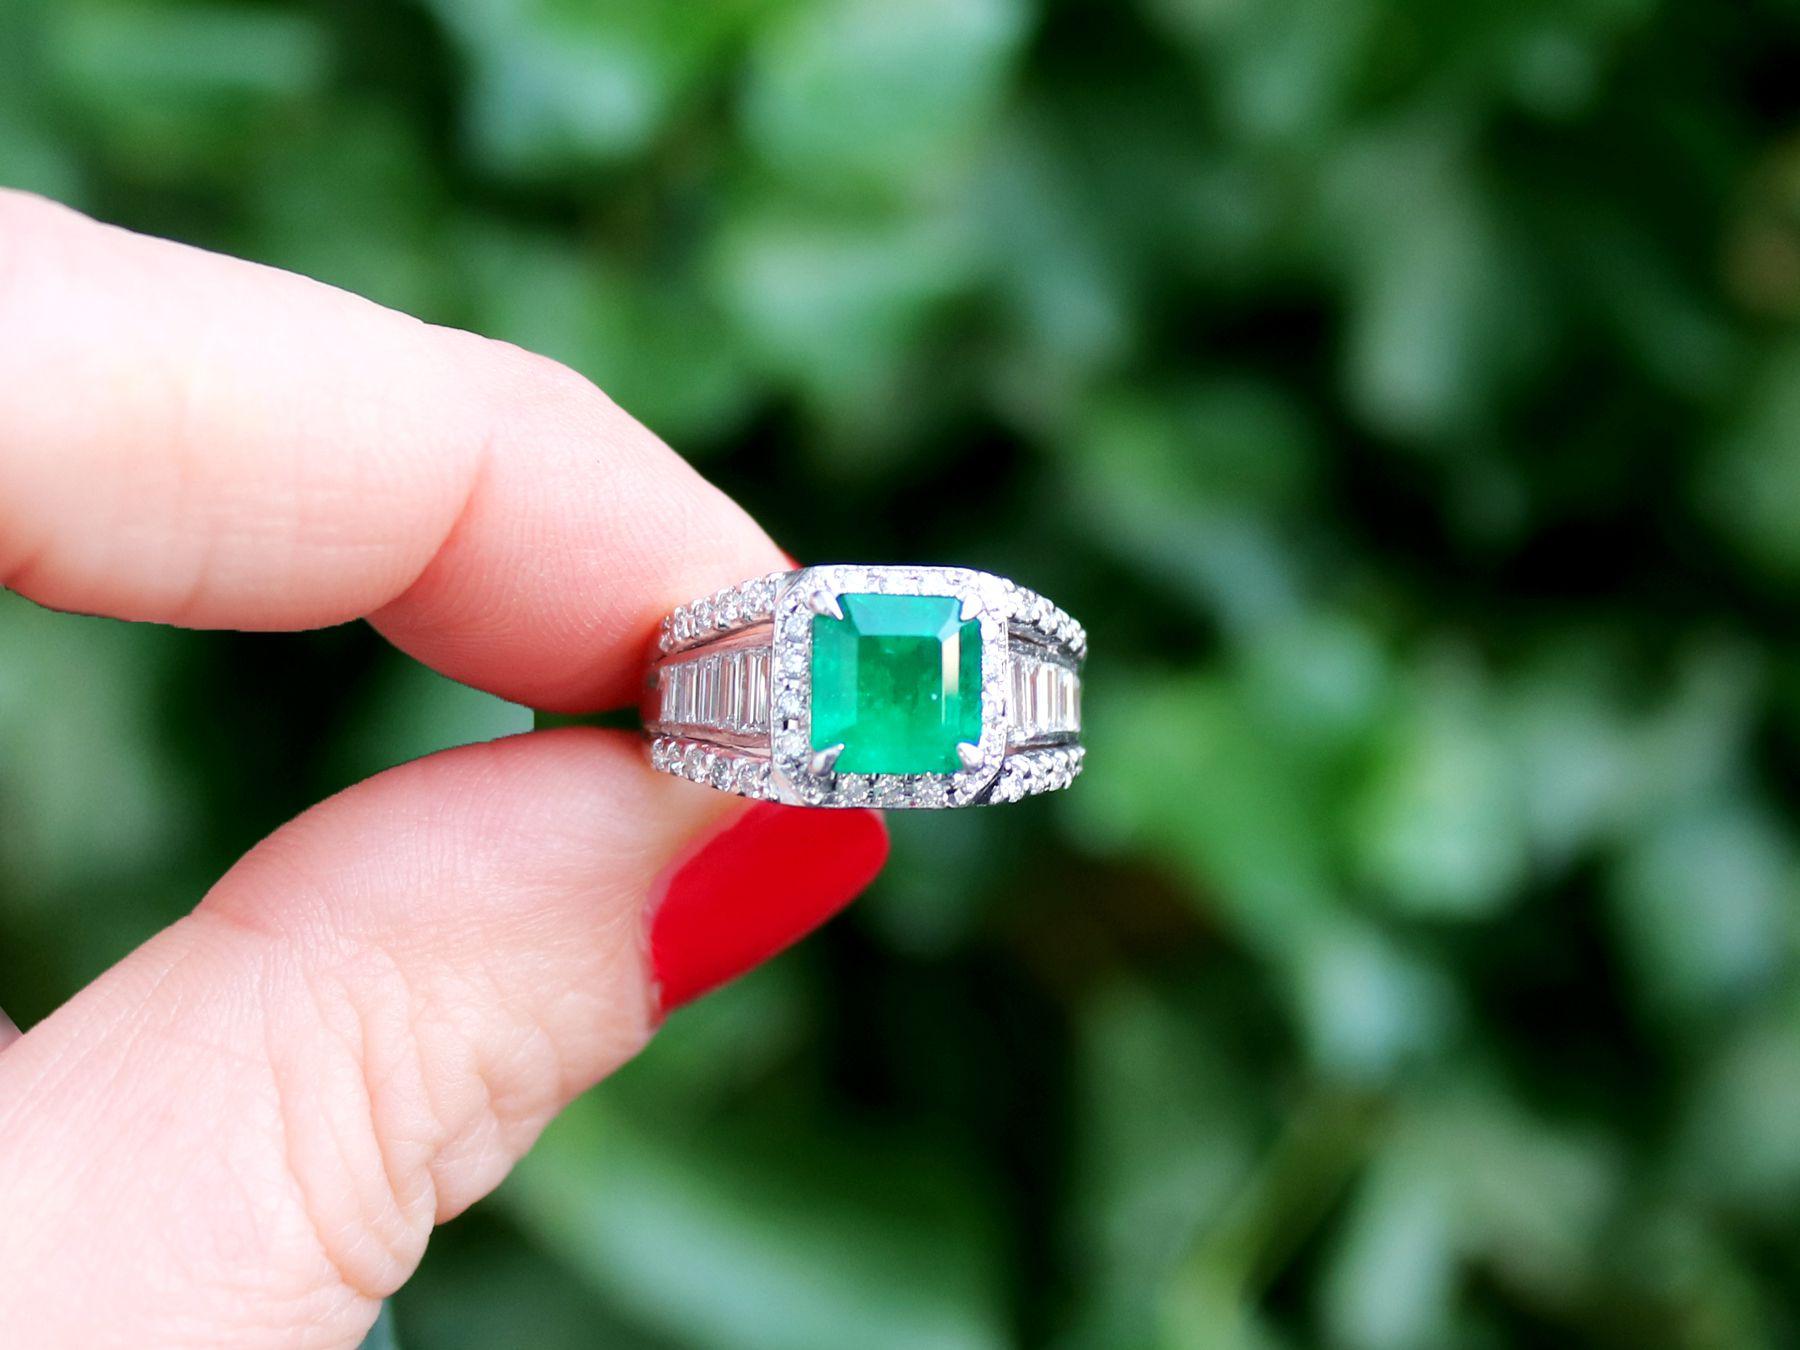 A fine and impressive contemporary 1.93 carat natural emerald and 0.92 carat diamond, platinum dress ring; part of our contemporary jewelry and estate jewelry collections.

This fine large, contemporary emerald and diamond dress ring has been